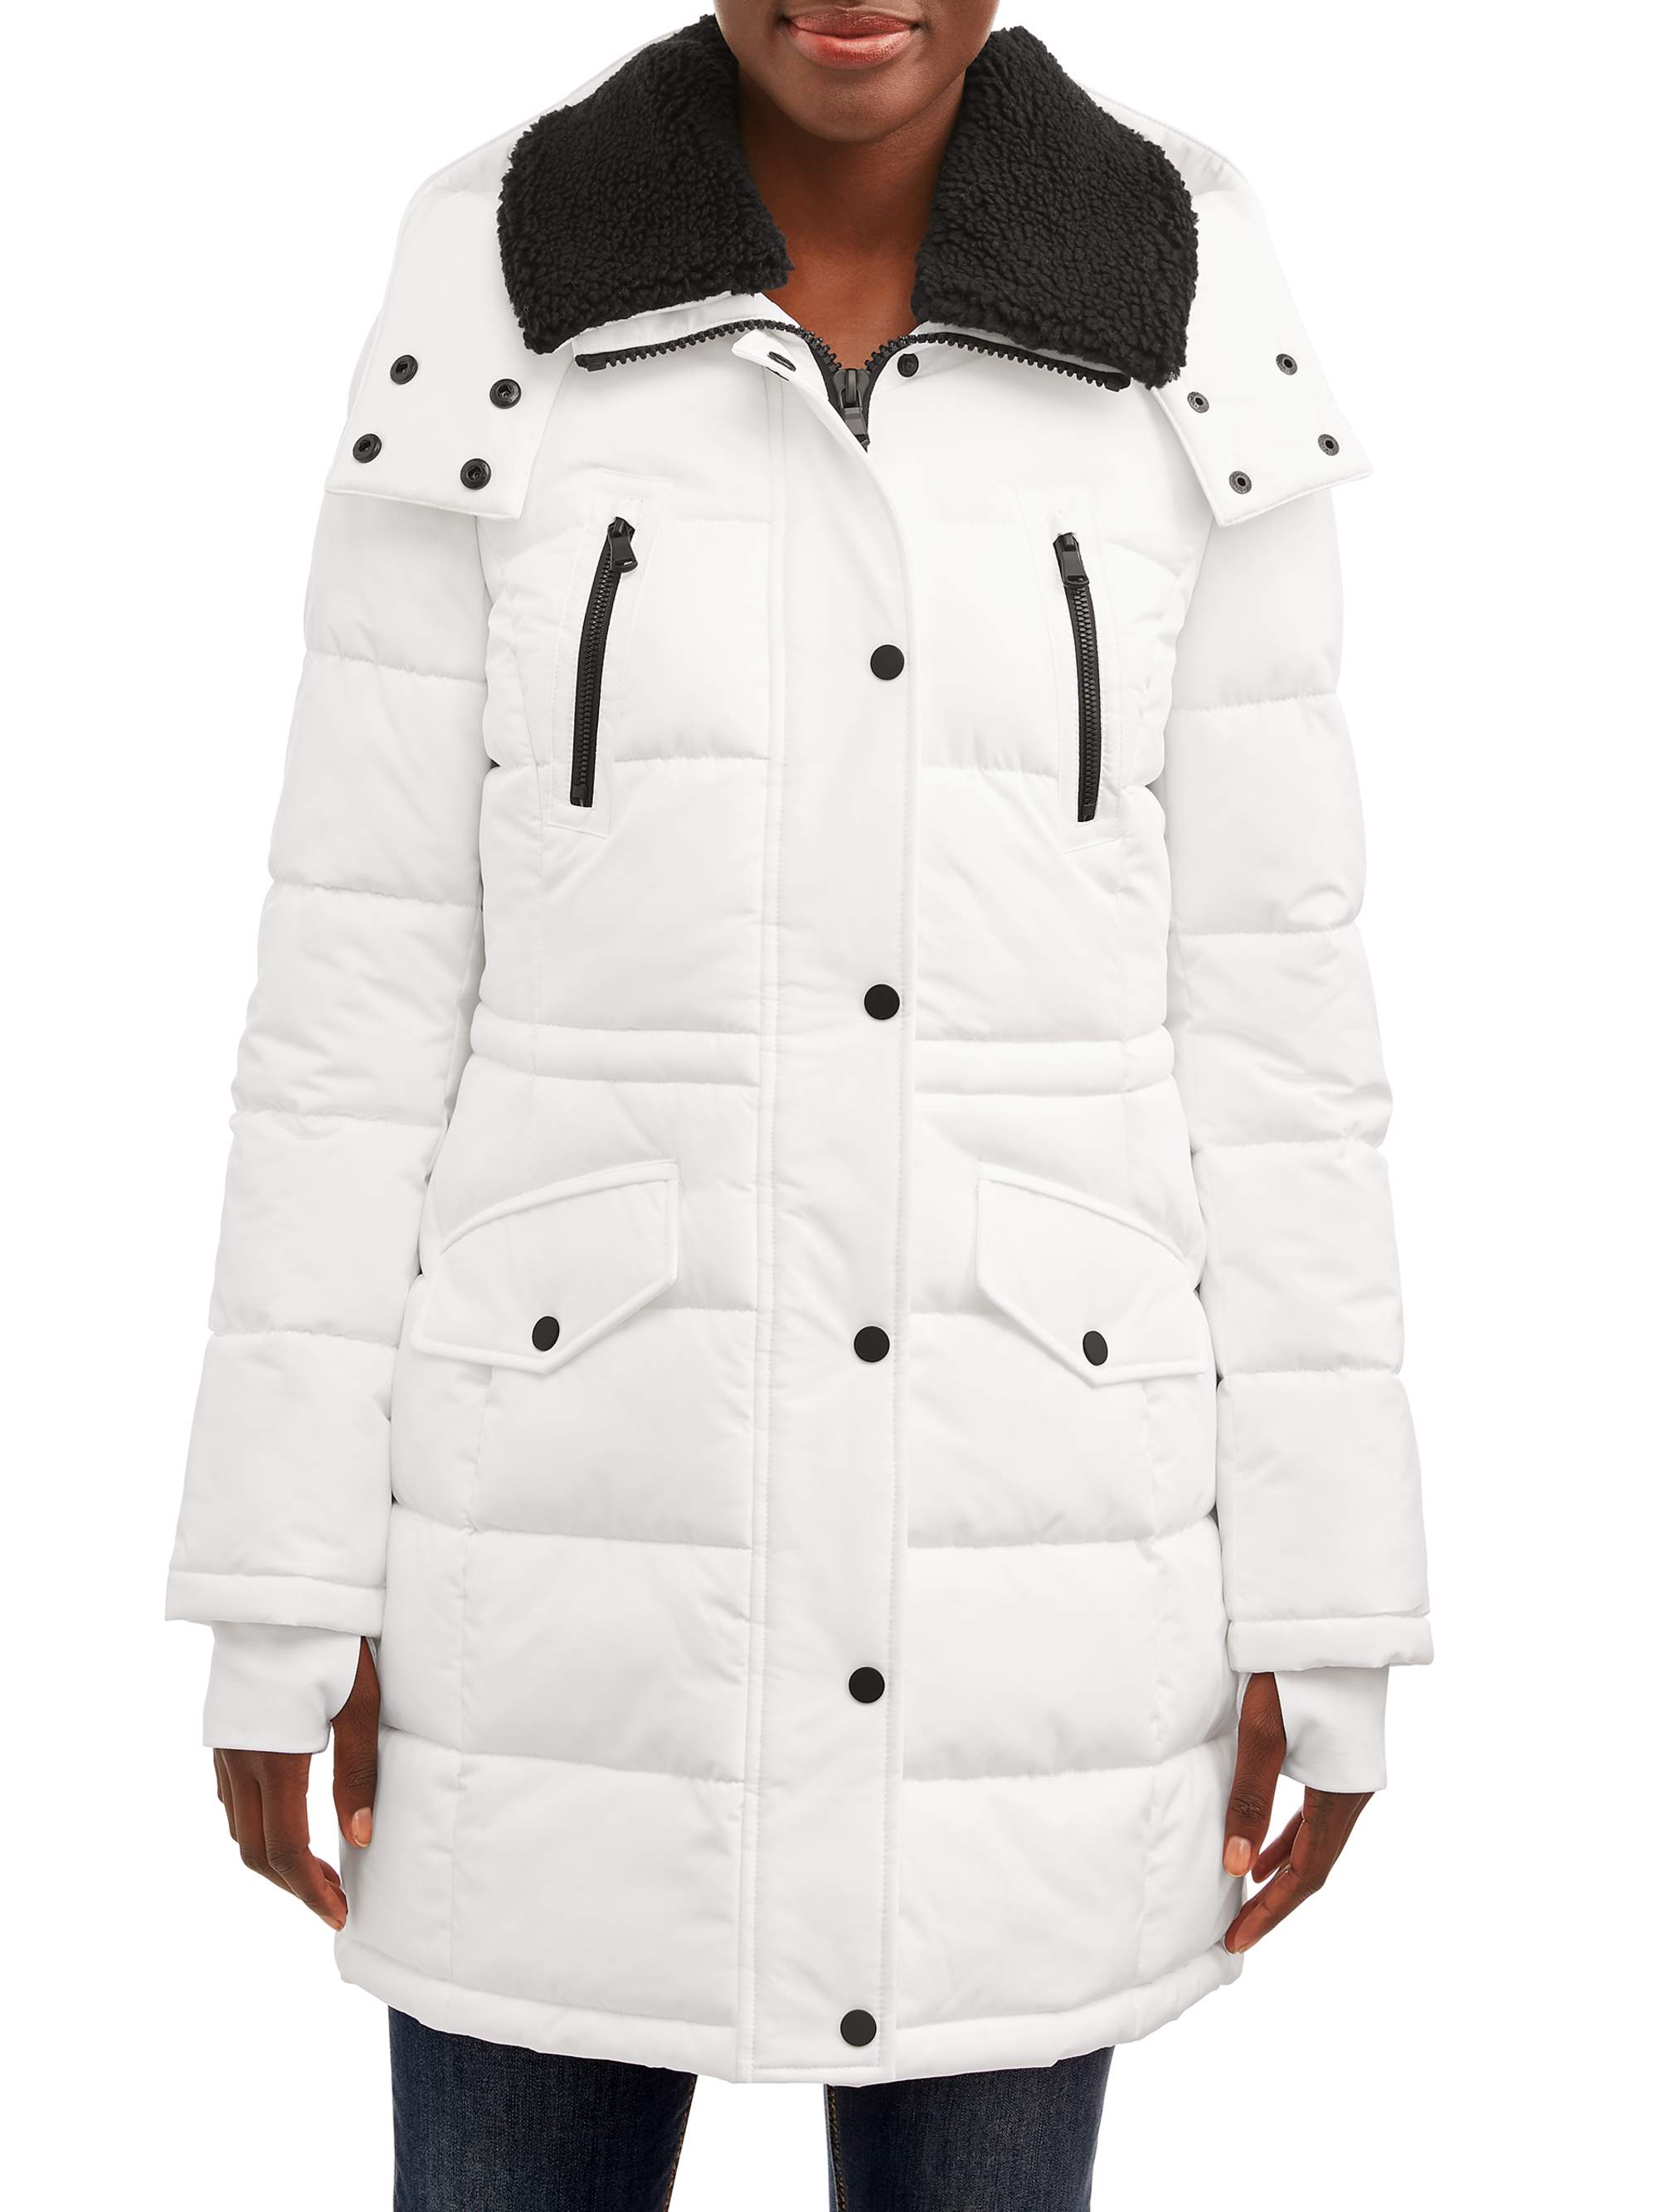 F.O.G. Women's Long Puffer with Snap Front Closure - image 1 of 4